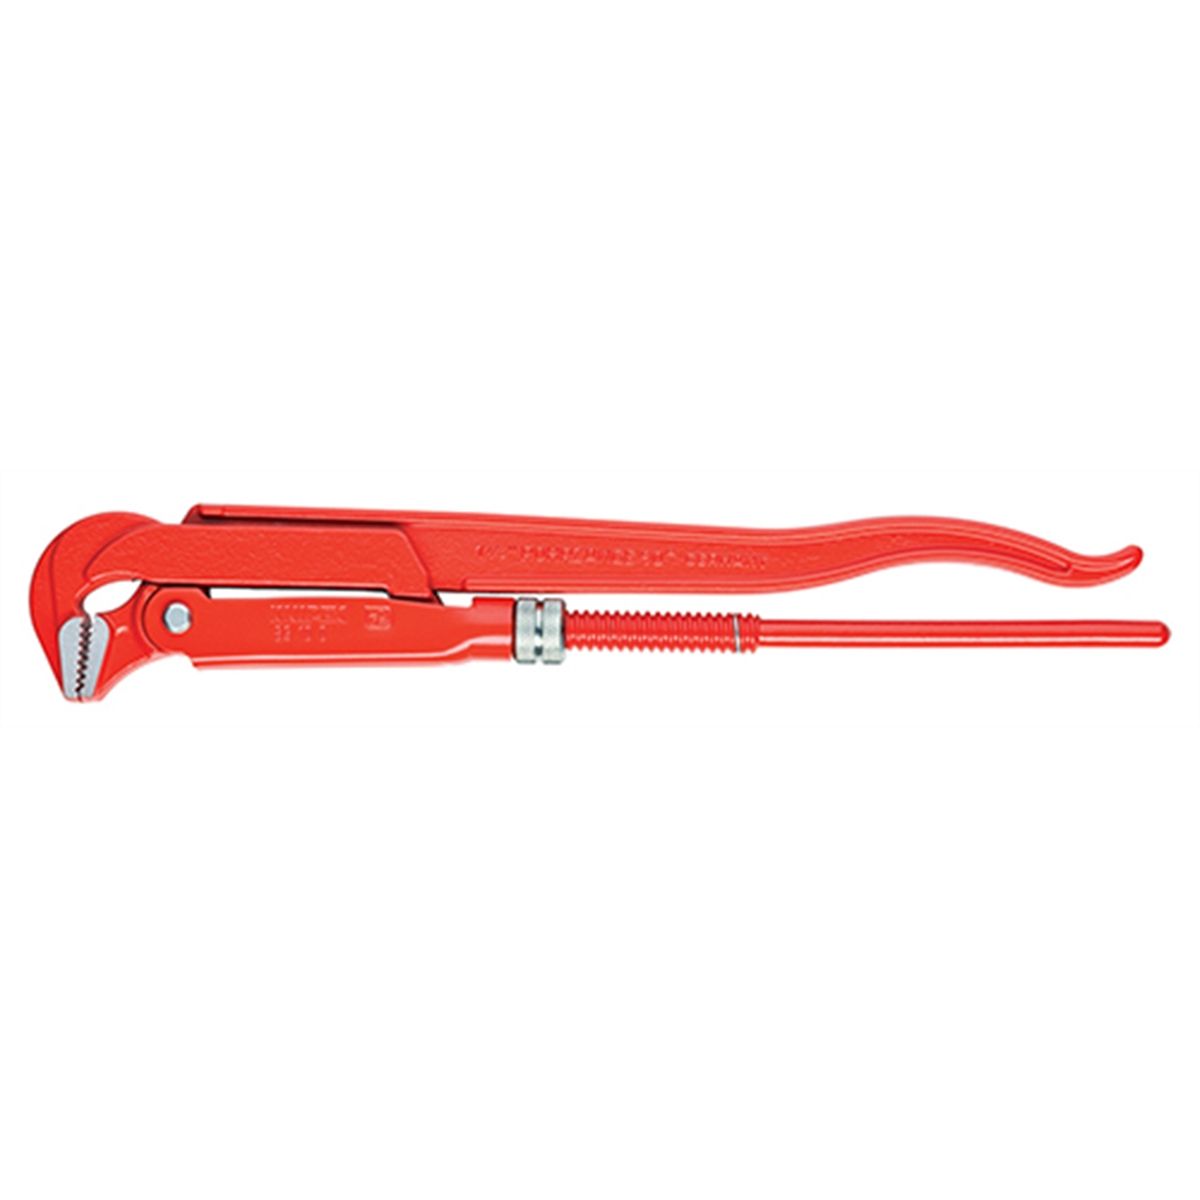 12-1/2" Length Swedish Pattern Pipe Wrench 90-degree Jaw